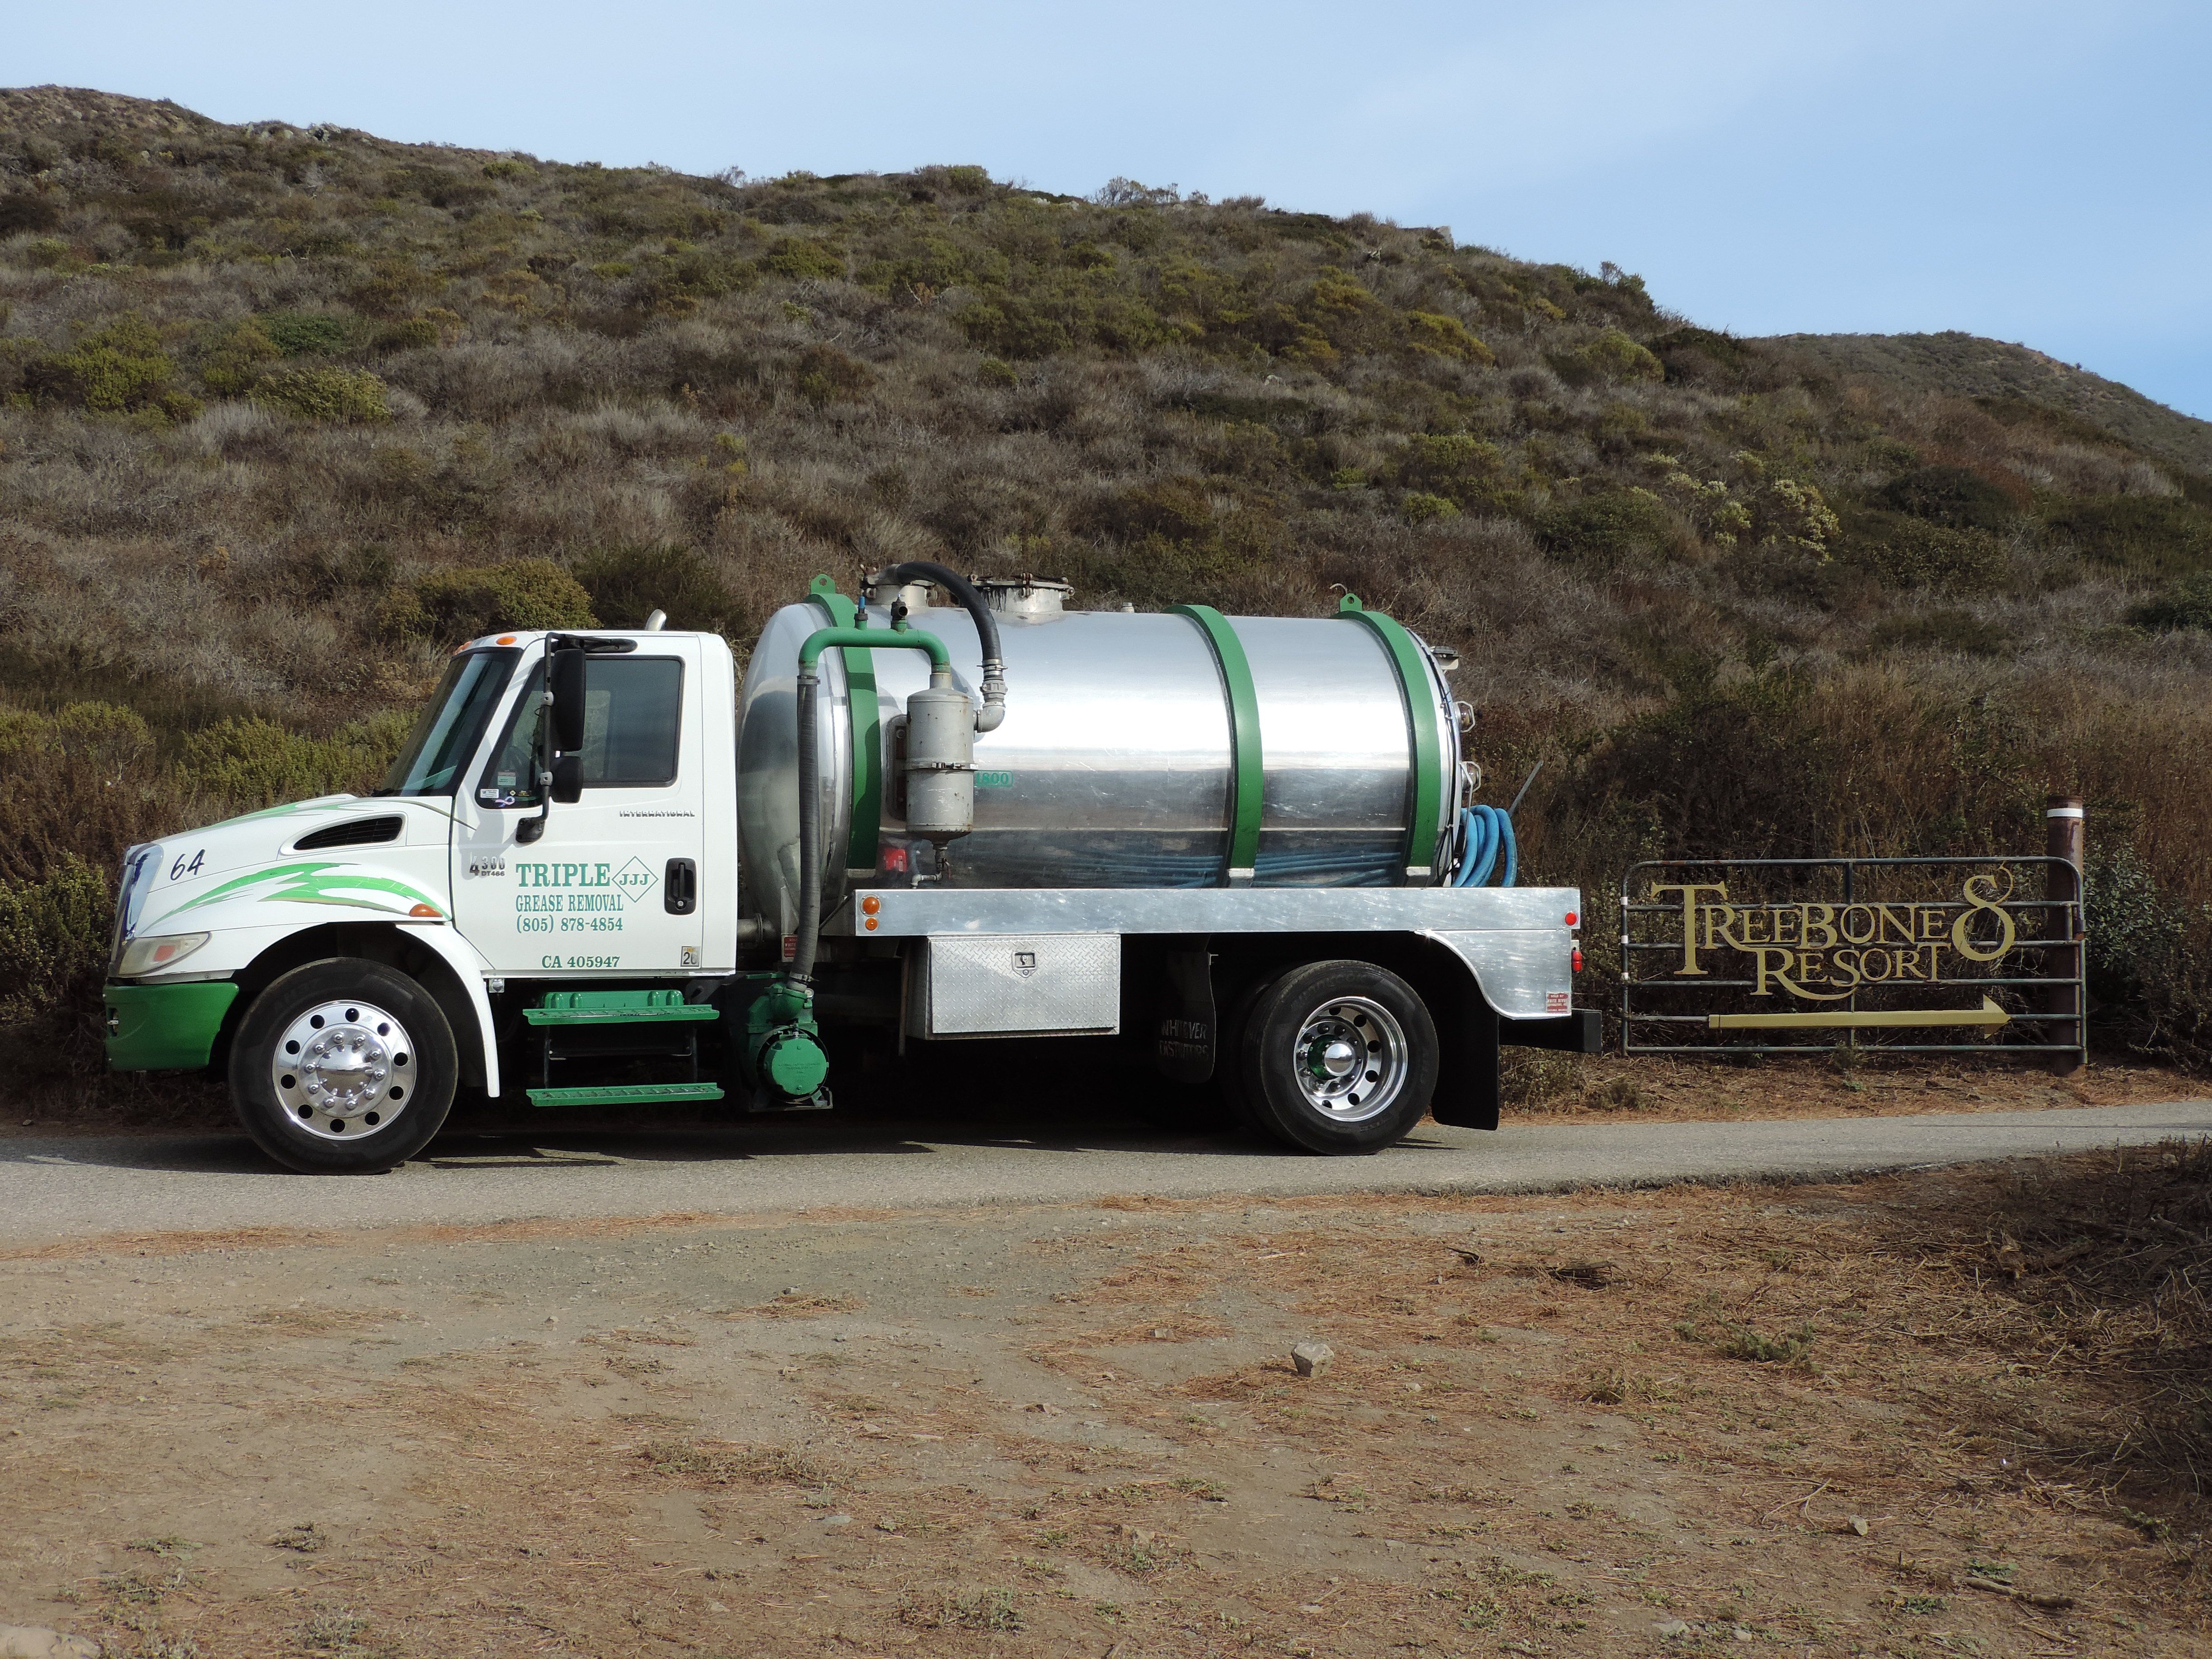 Commercial Grease Trap Cleaning in Oceano, California